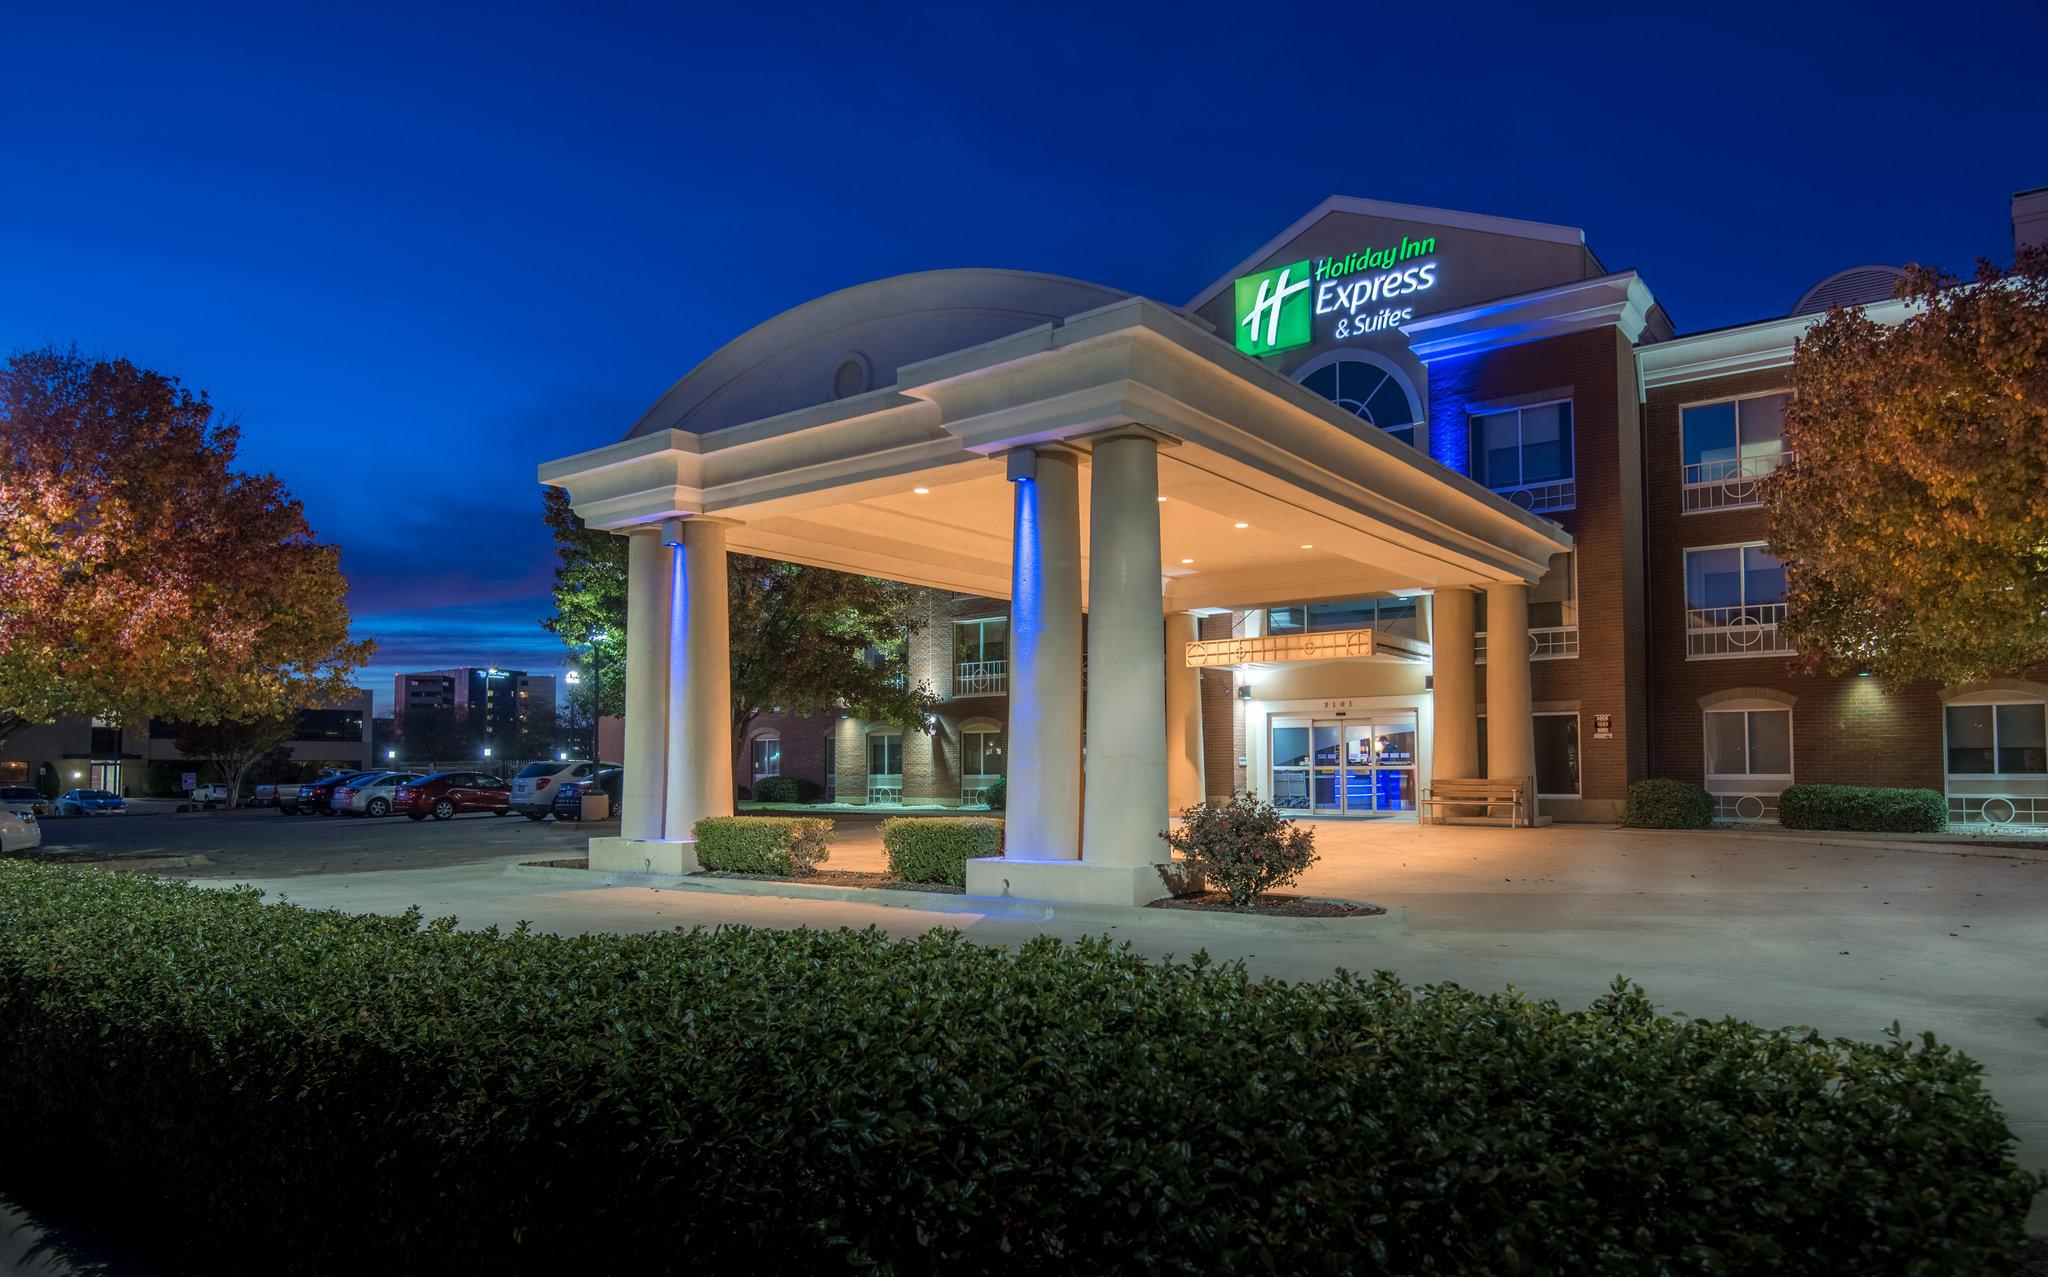 Holiday Inn Express & Suites Dallas-North Tollway (N Plano) in Plano, TX